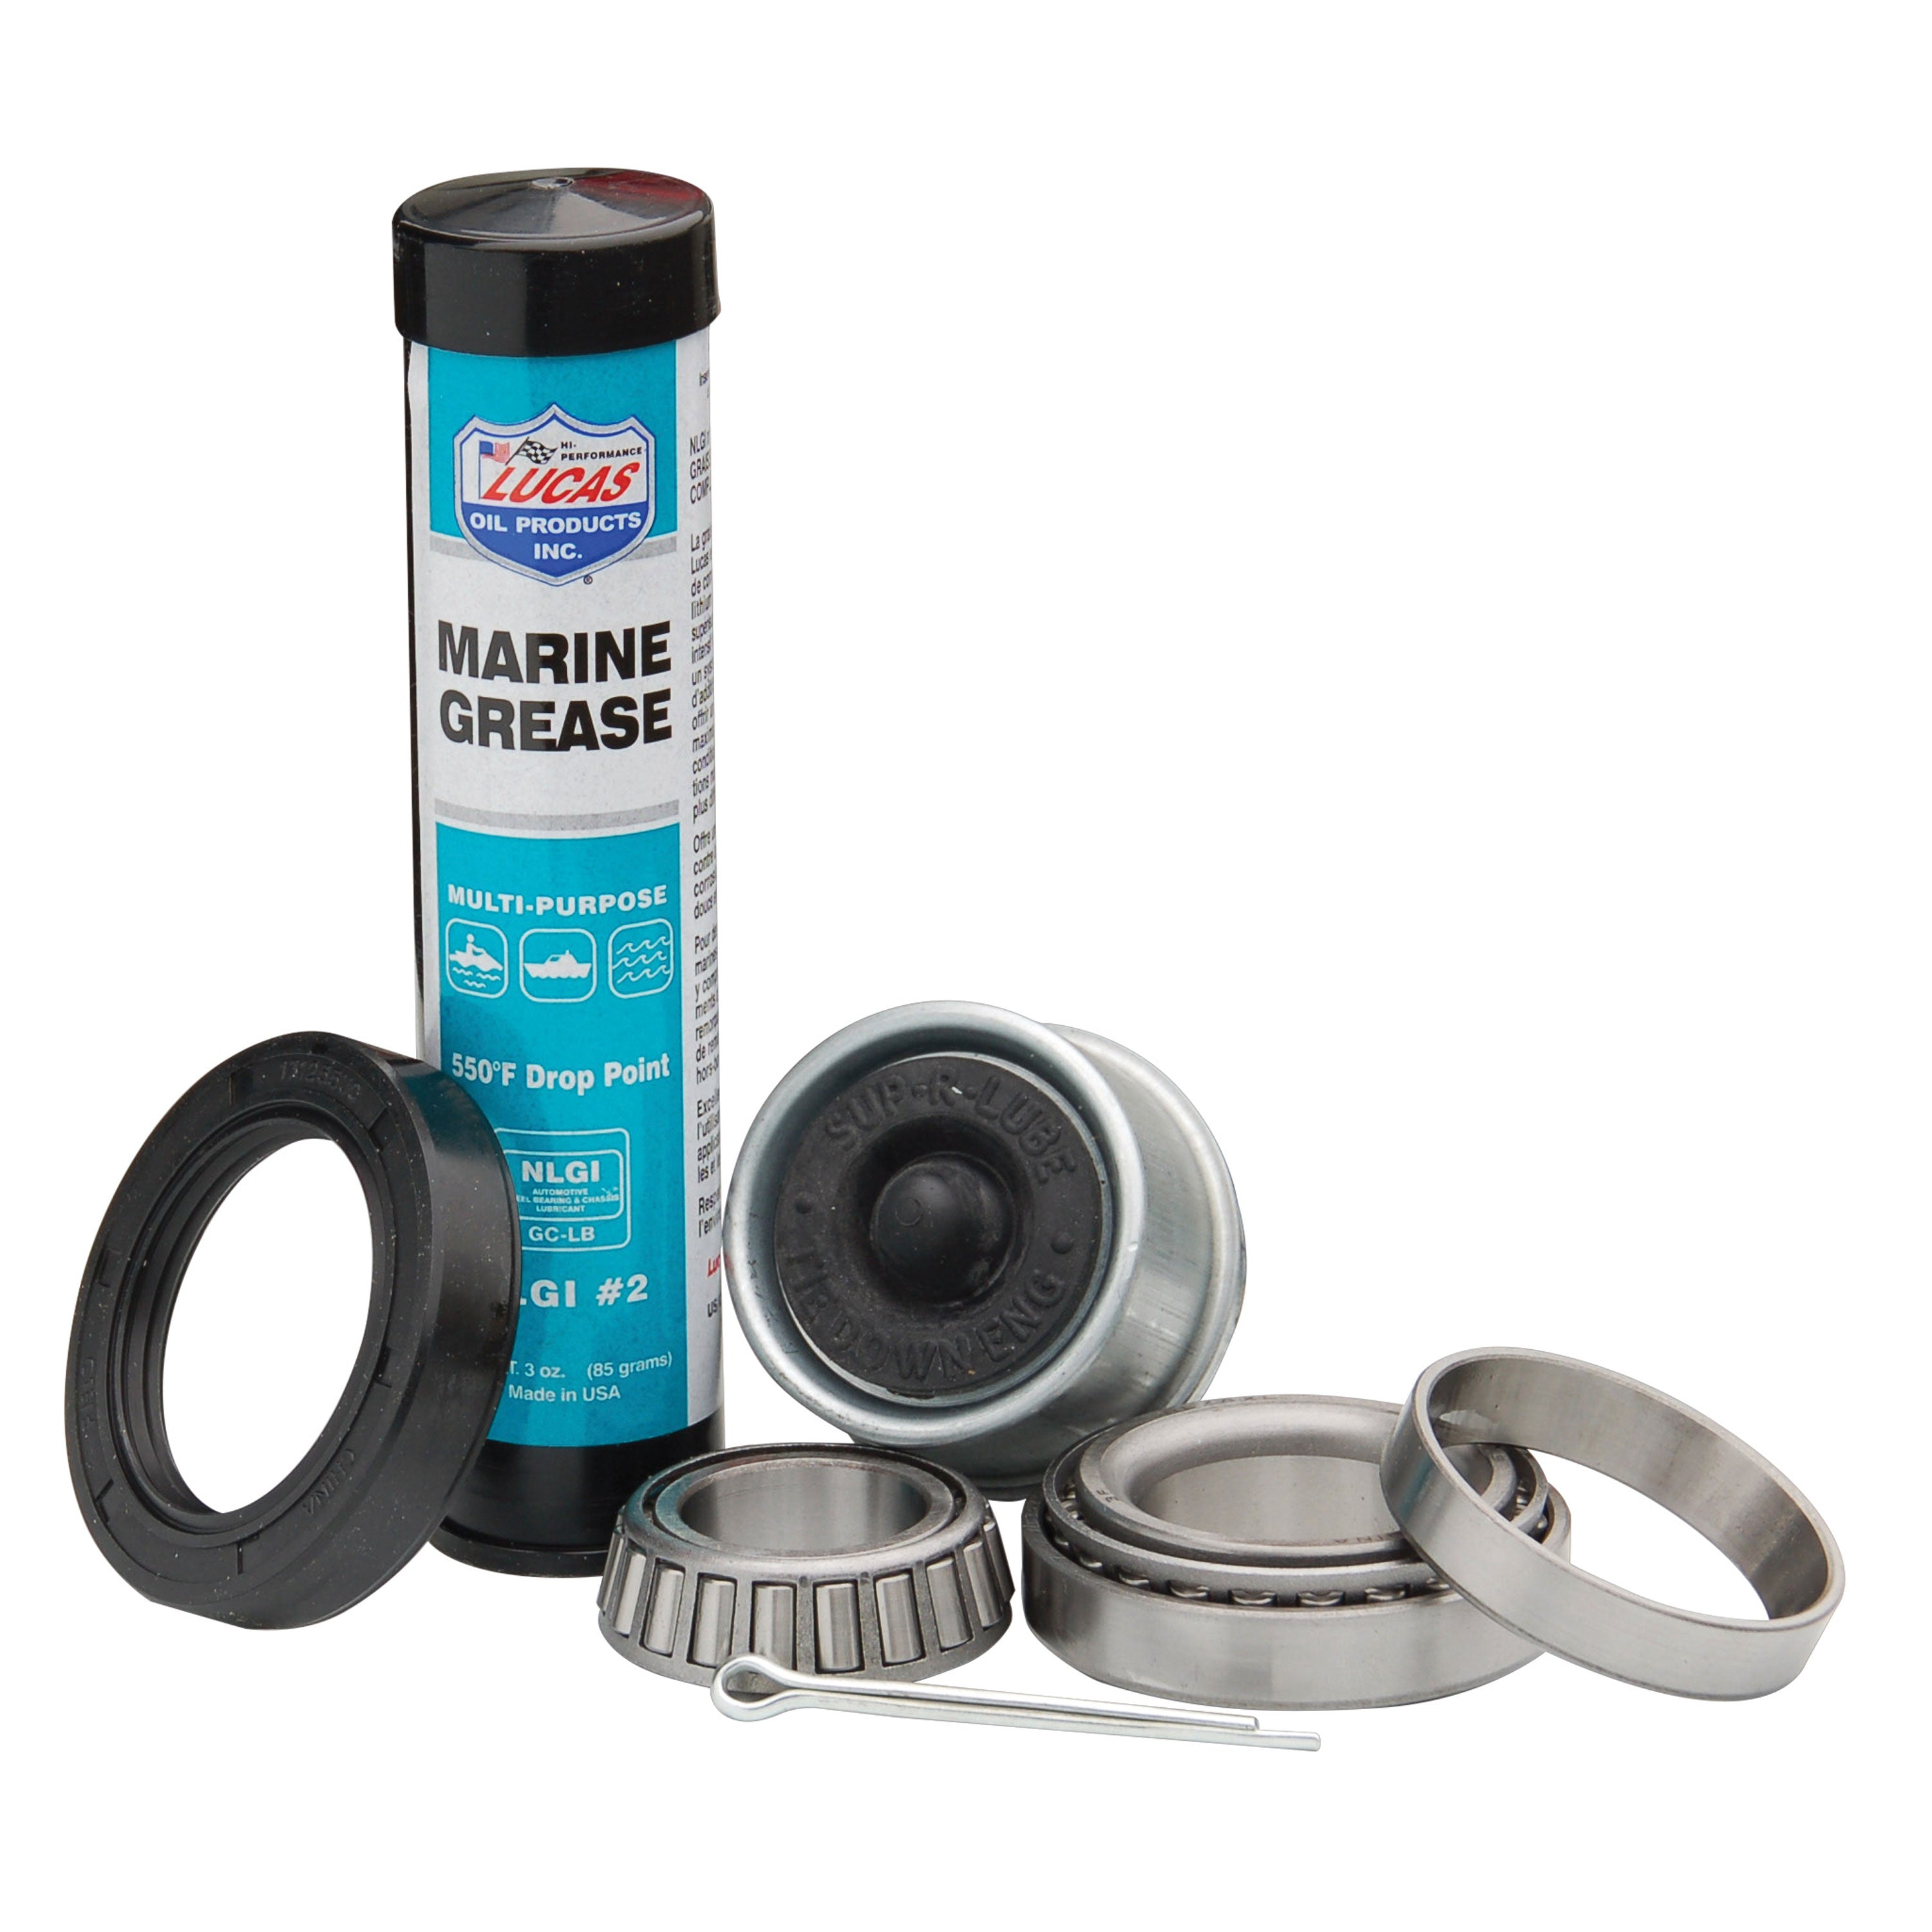 Tie Down Engineering K71-G02-63 81134 Vortex Bearing and Grease Kit with Stainless Steel Cap - 1-3/8" x  1-1/16" (Cup 2.3612" OD)